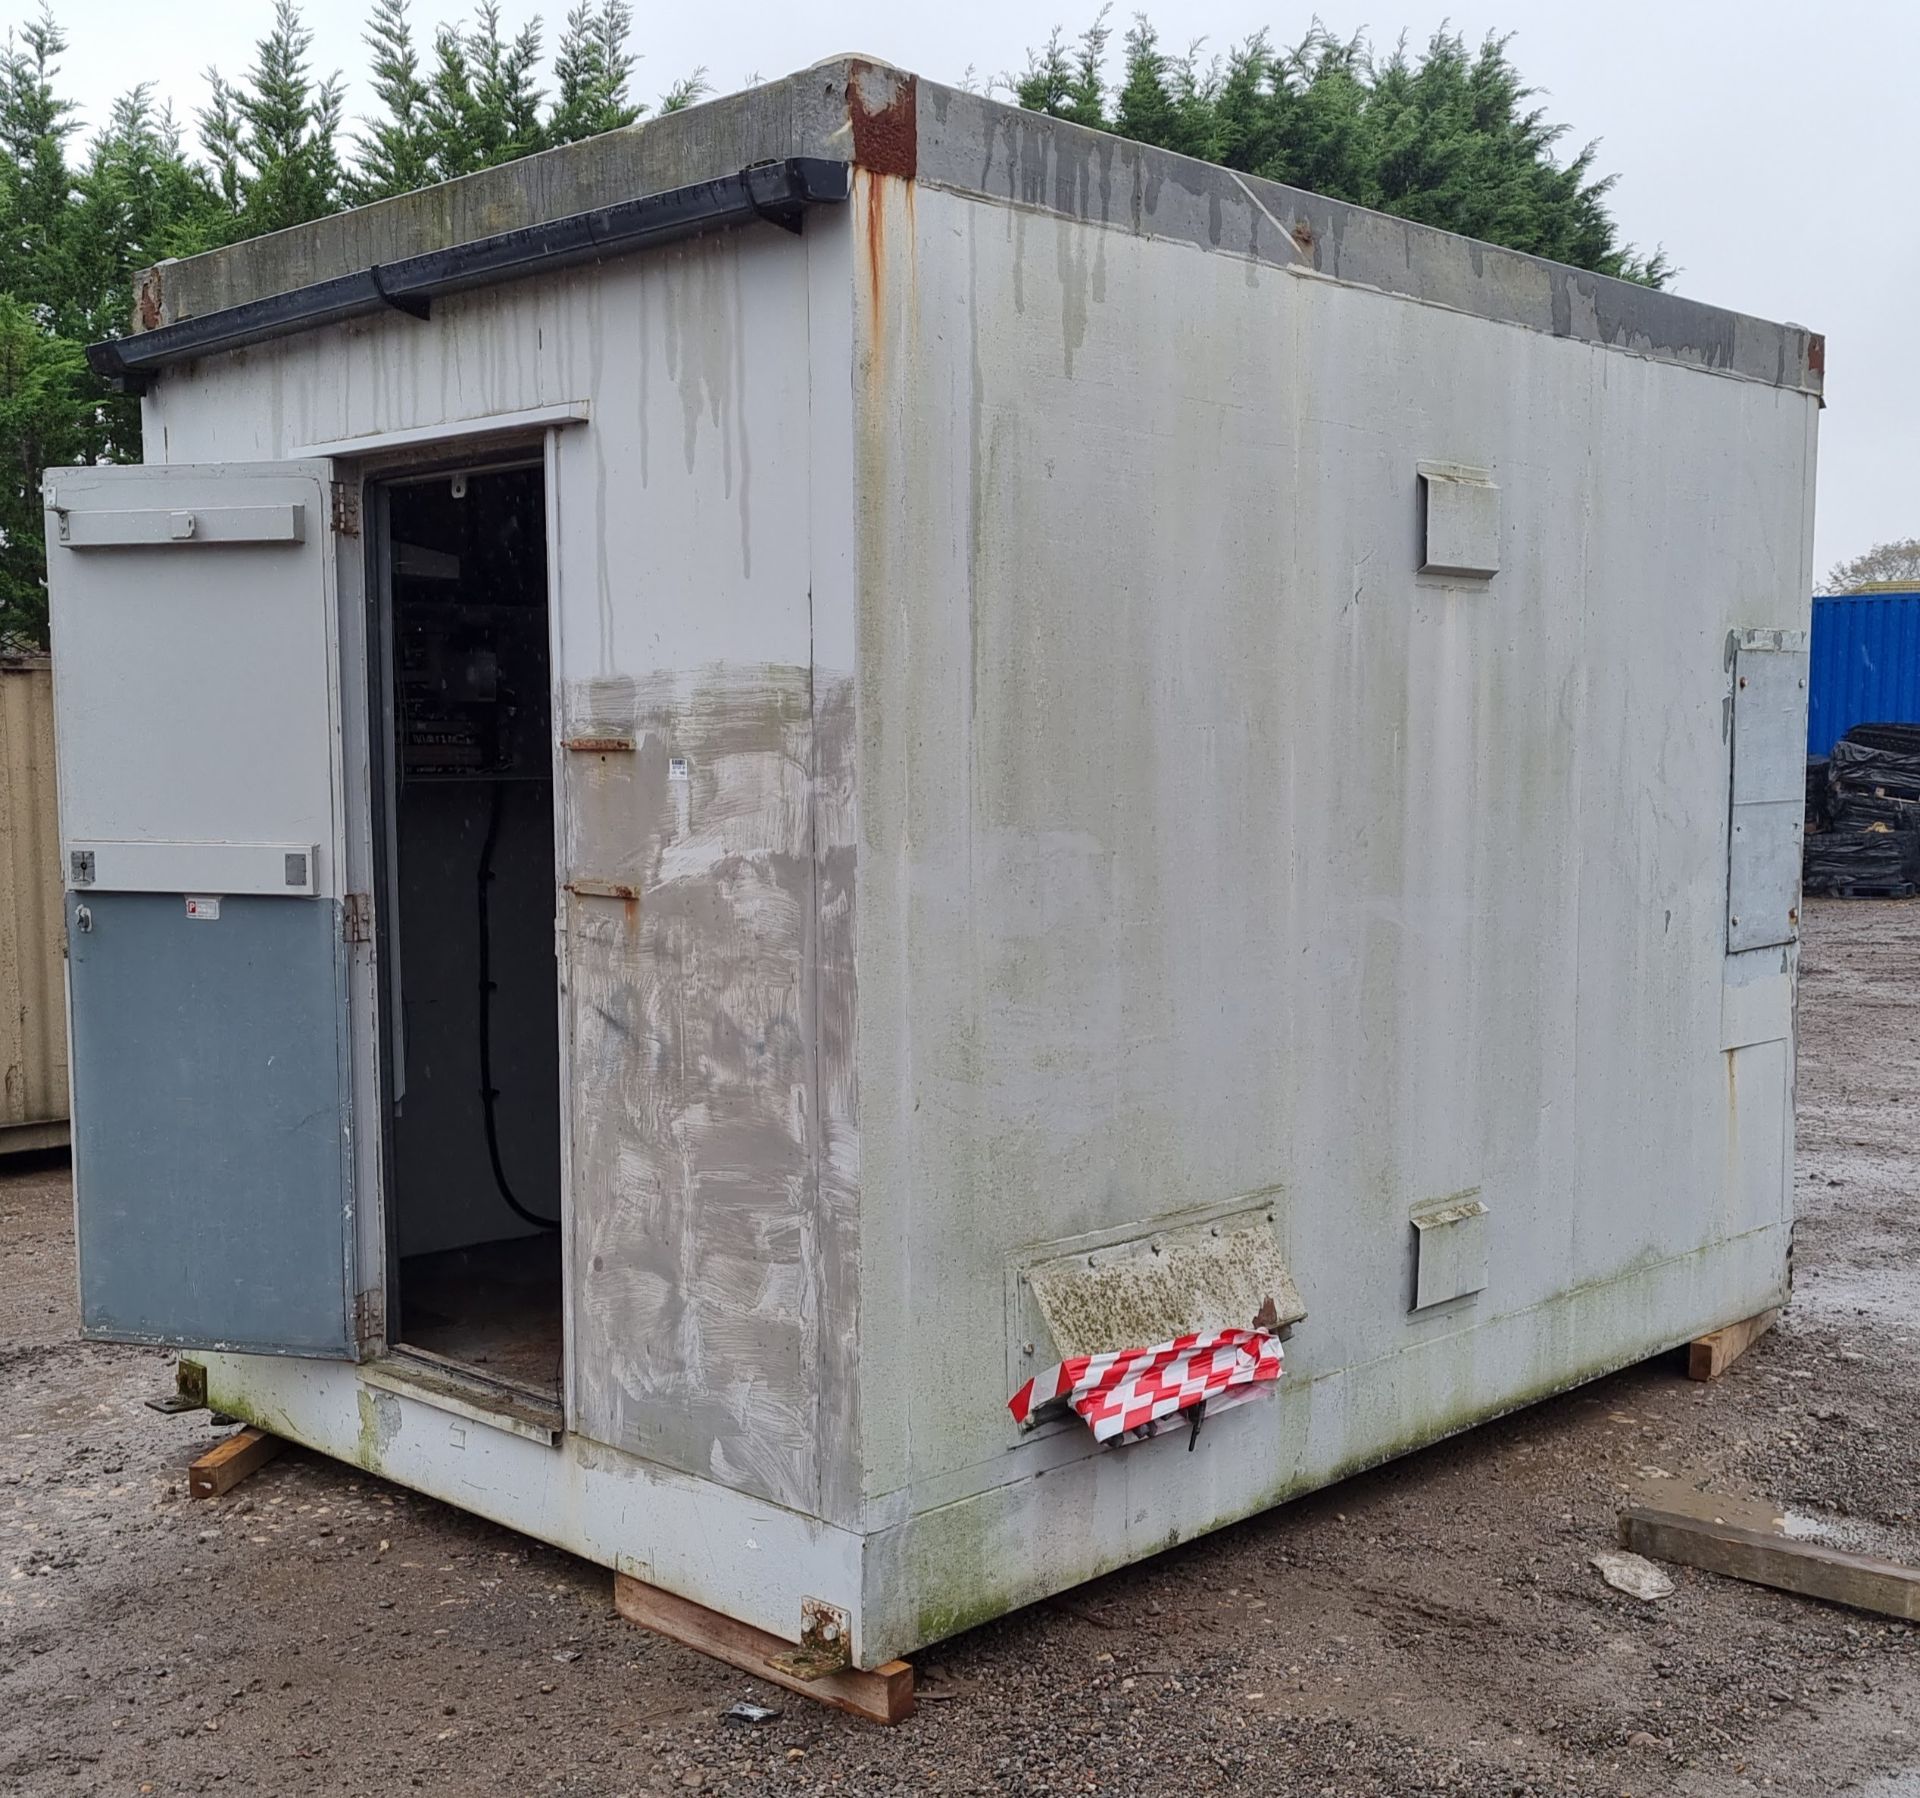 Metal container - single door on one end - L 13 x W 9 x H 9.5 ft - will require new lock - Bild 7 aus 7